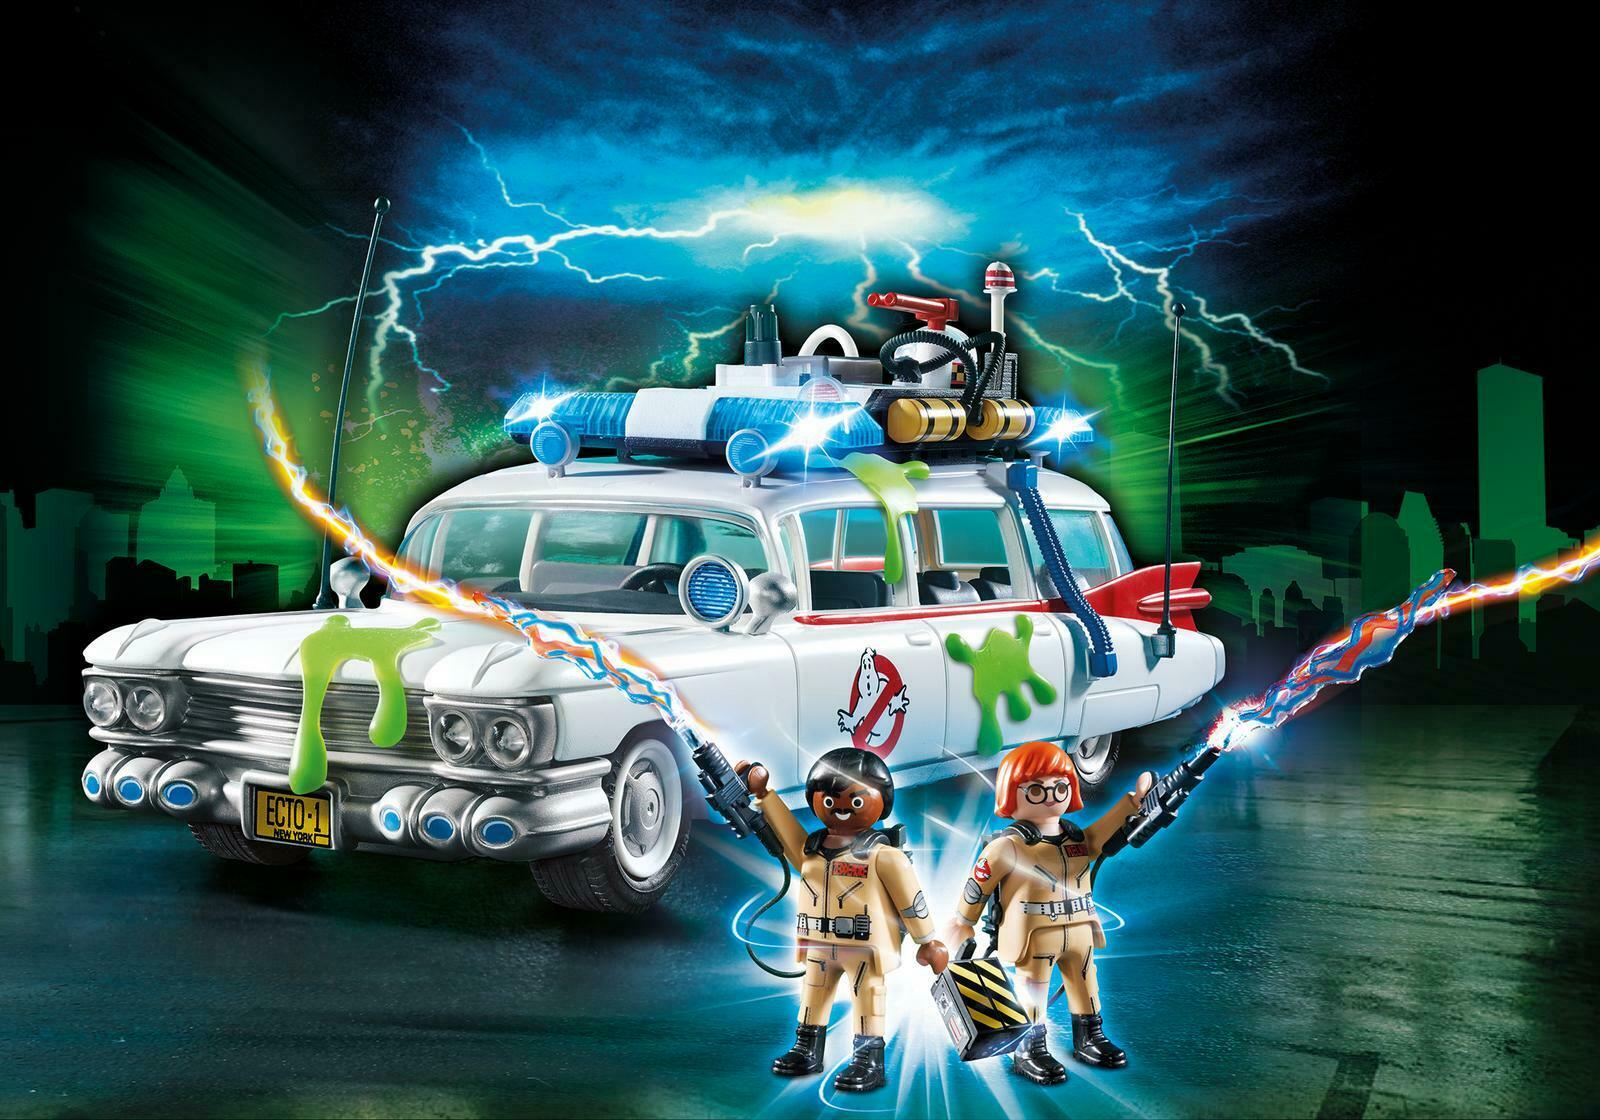 Playmobil Ghostbusters #9220 Ghostbusters Ecto-1 - New Factory Sealed